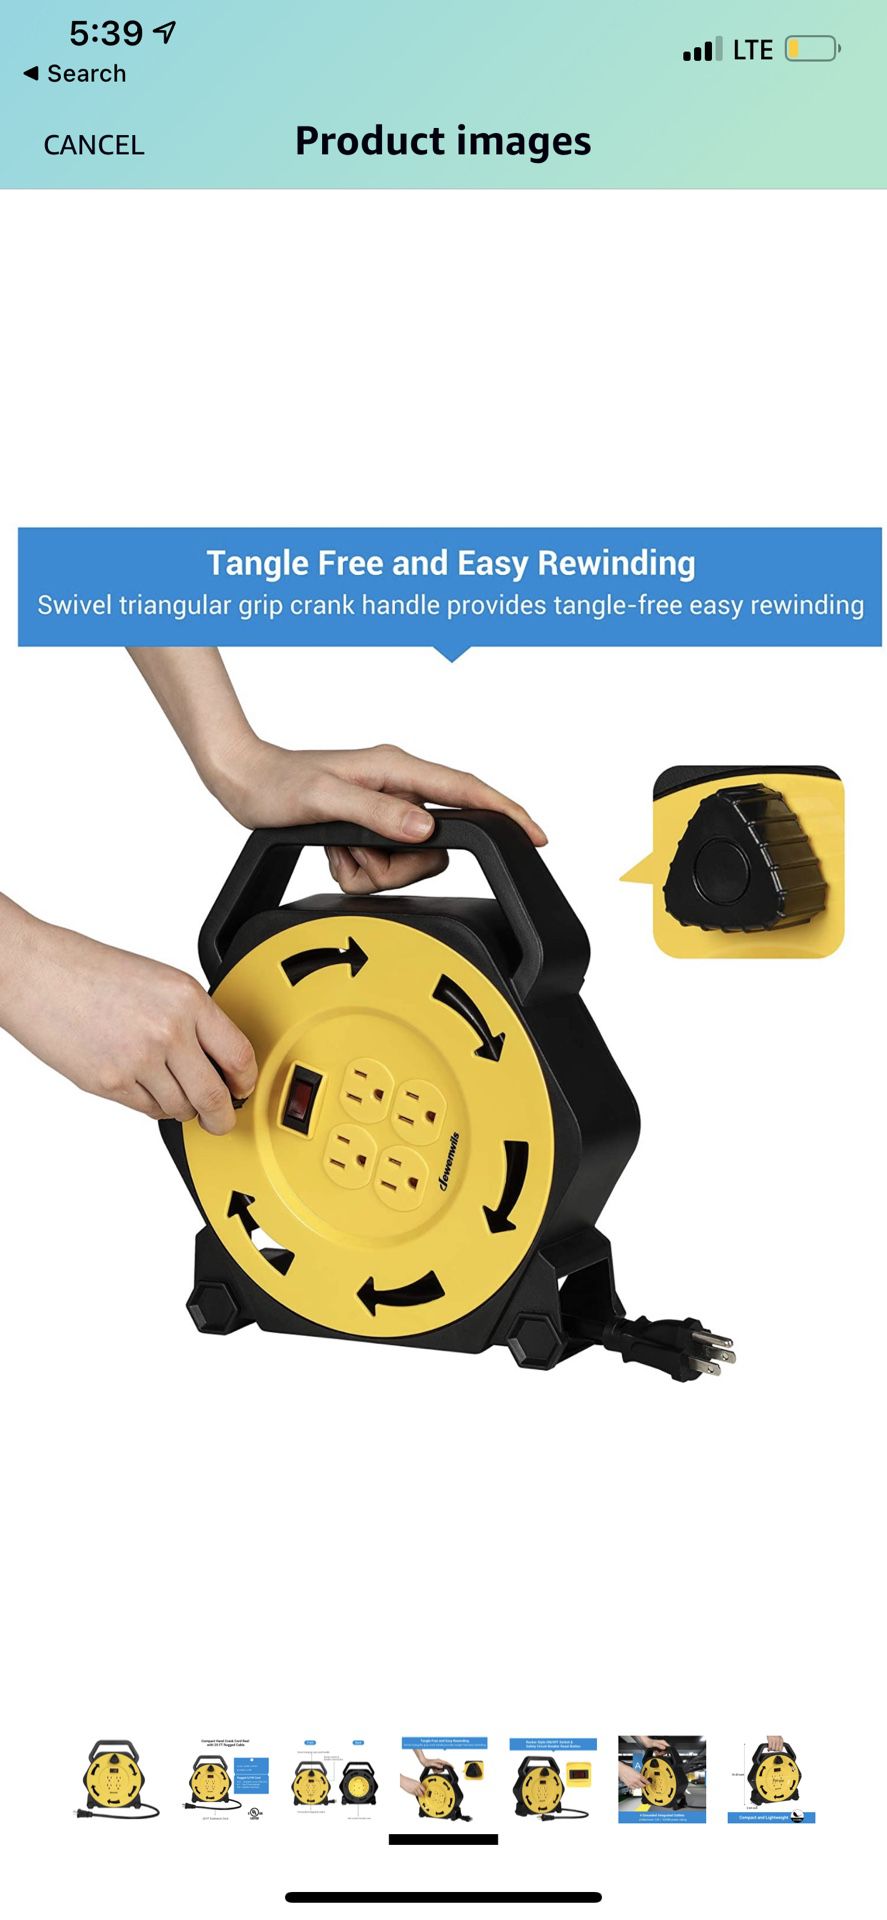 DEWENWILS Extension Cord Reel with 25 FT Power Cord, Hand Wind Retractable, 16/3 AWG SJTW, 4 Grounded Outlets, 13 Amp Circuit Breaker, Yellow, Black, 